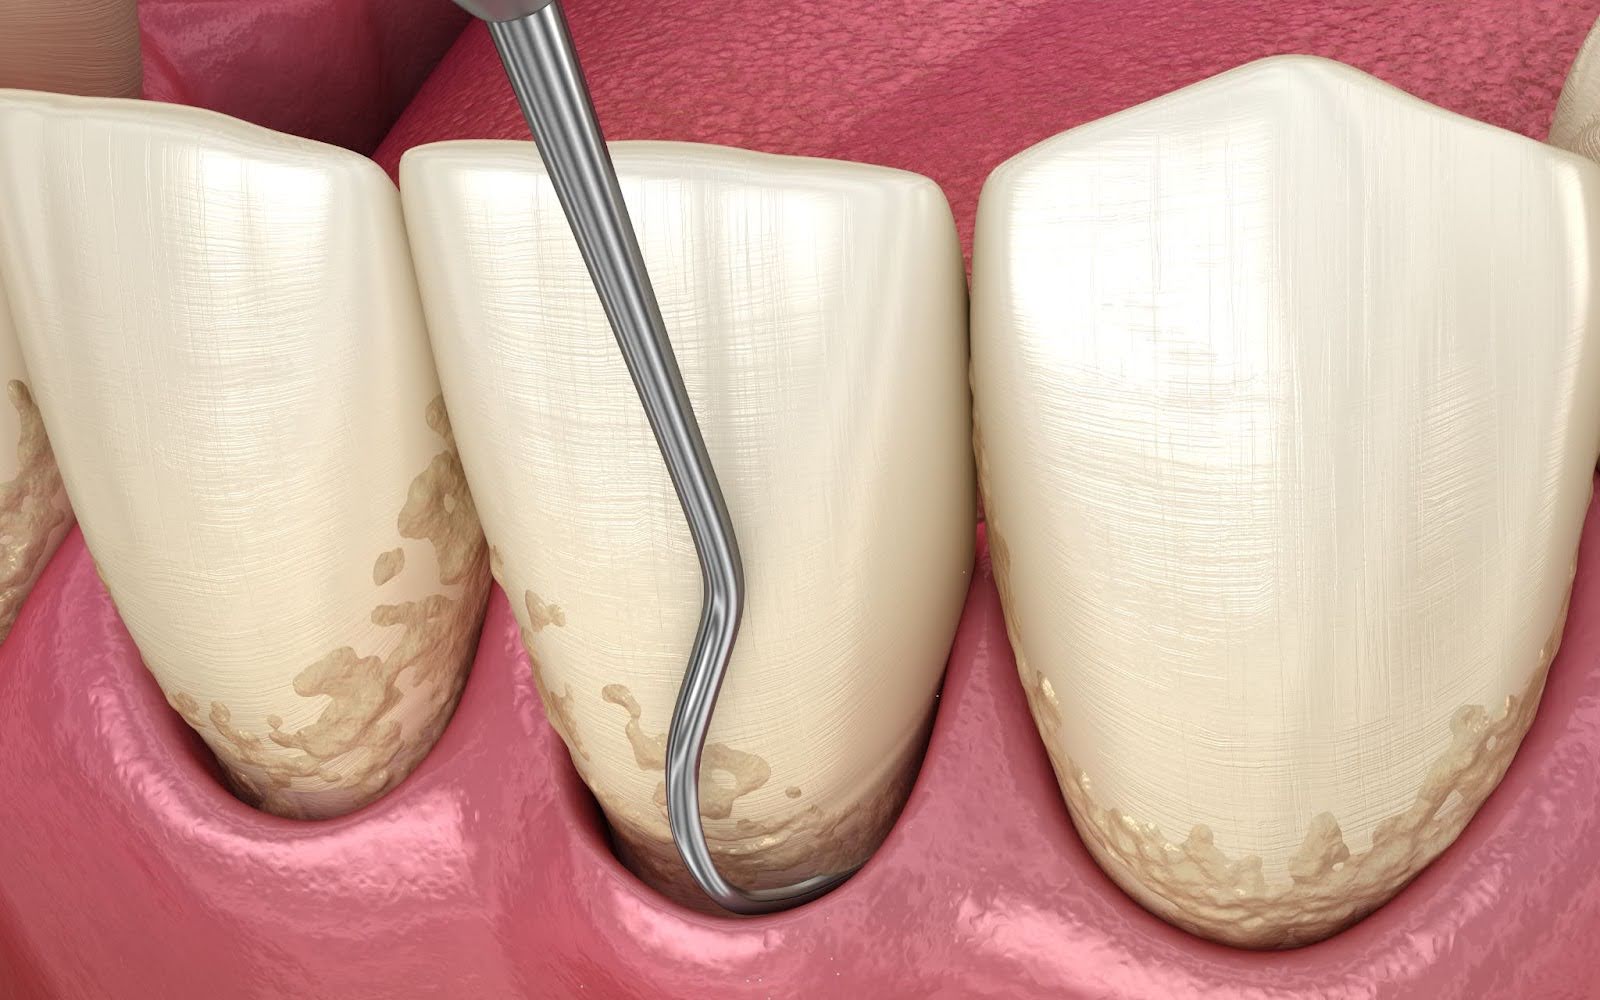 How does scaling and root planing help address gum recession?